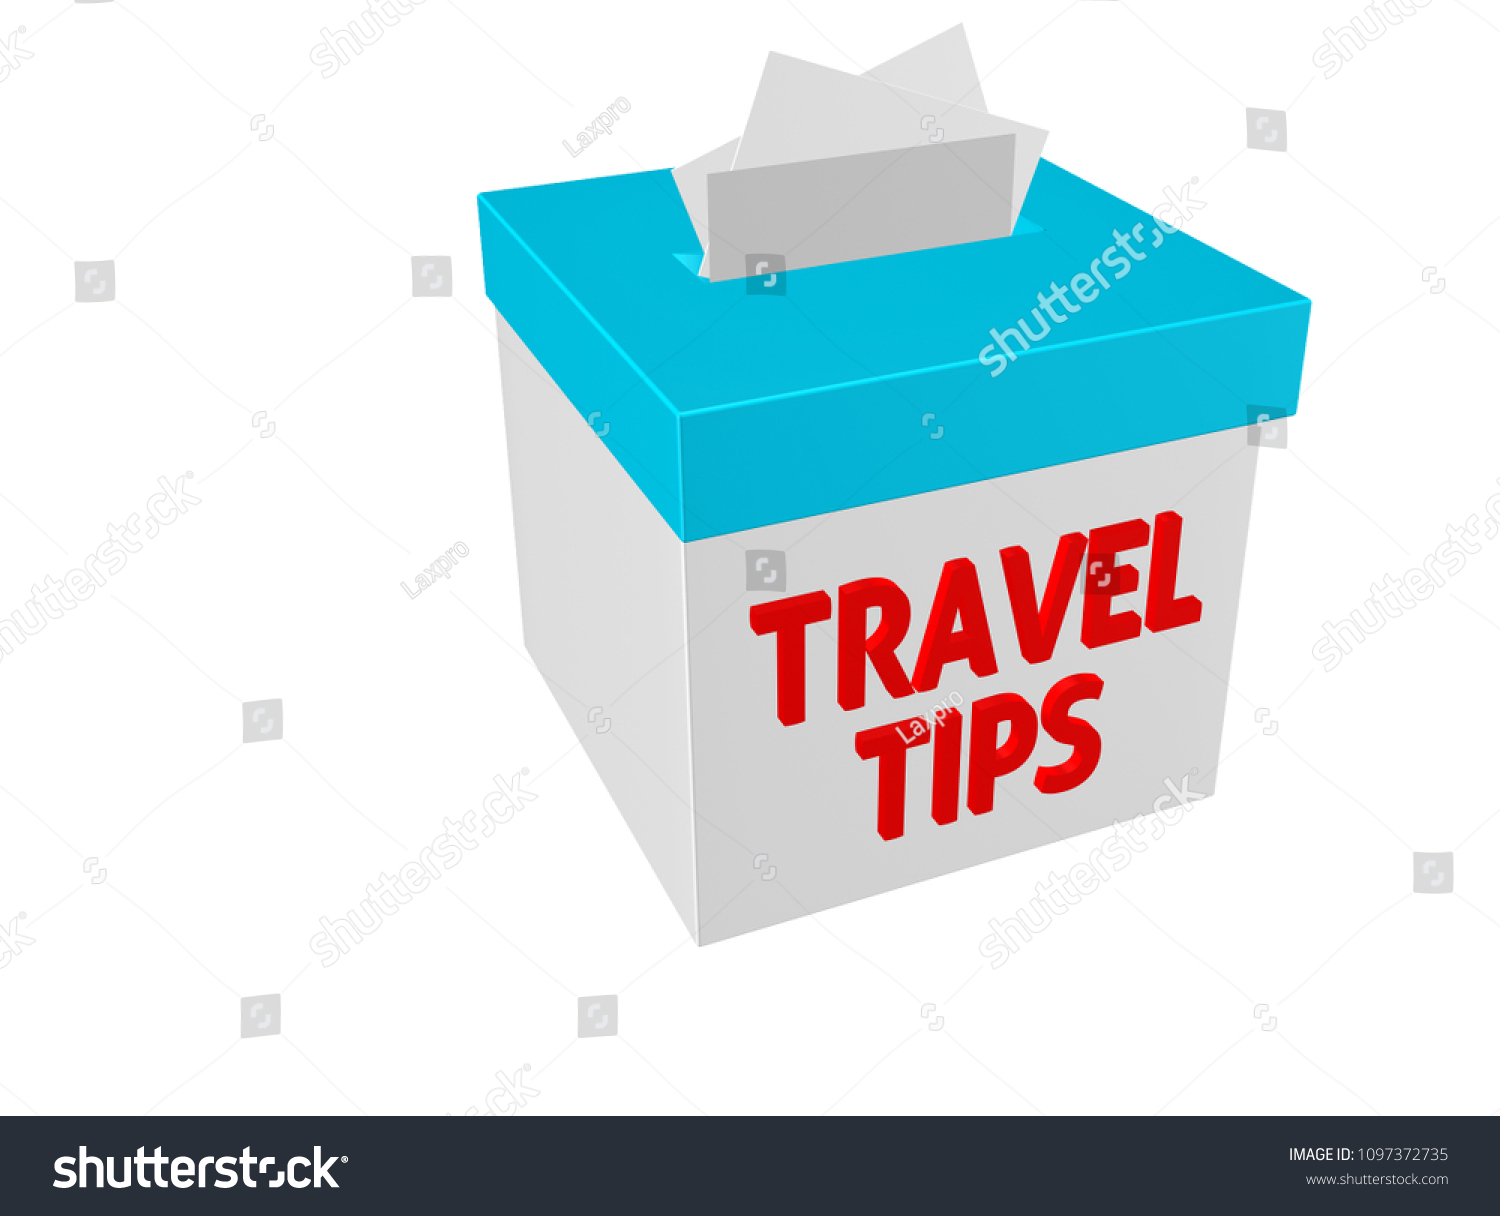 Travel With Mat - Travel Tips & Reviews Podcast - Society Podcast -  Podchaser